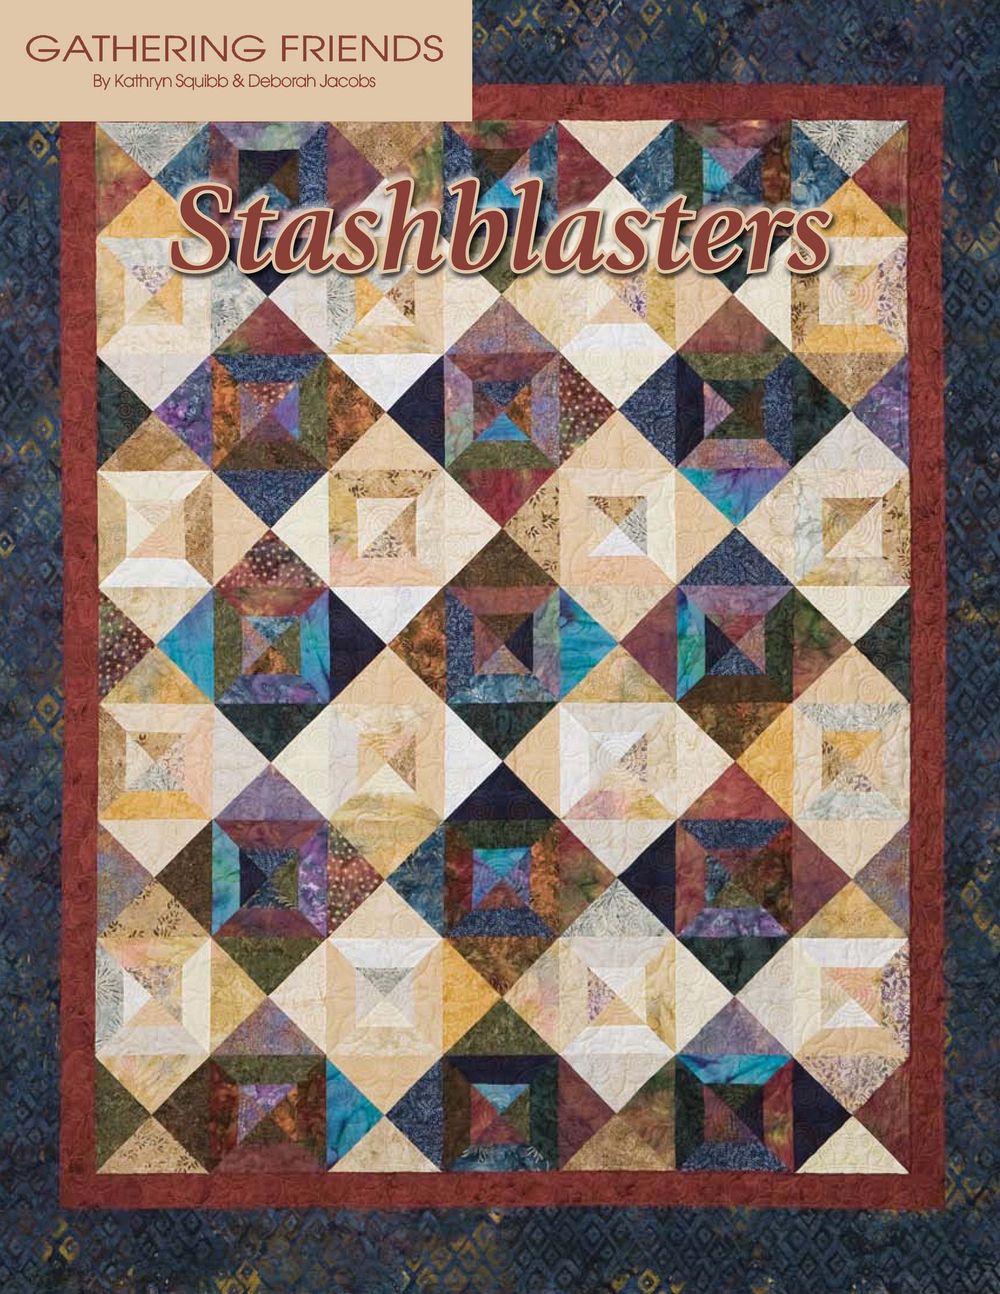 Stashblasters Quilt Pattern Book by Kathryn Squibb of Gathering Friends